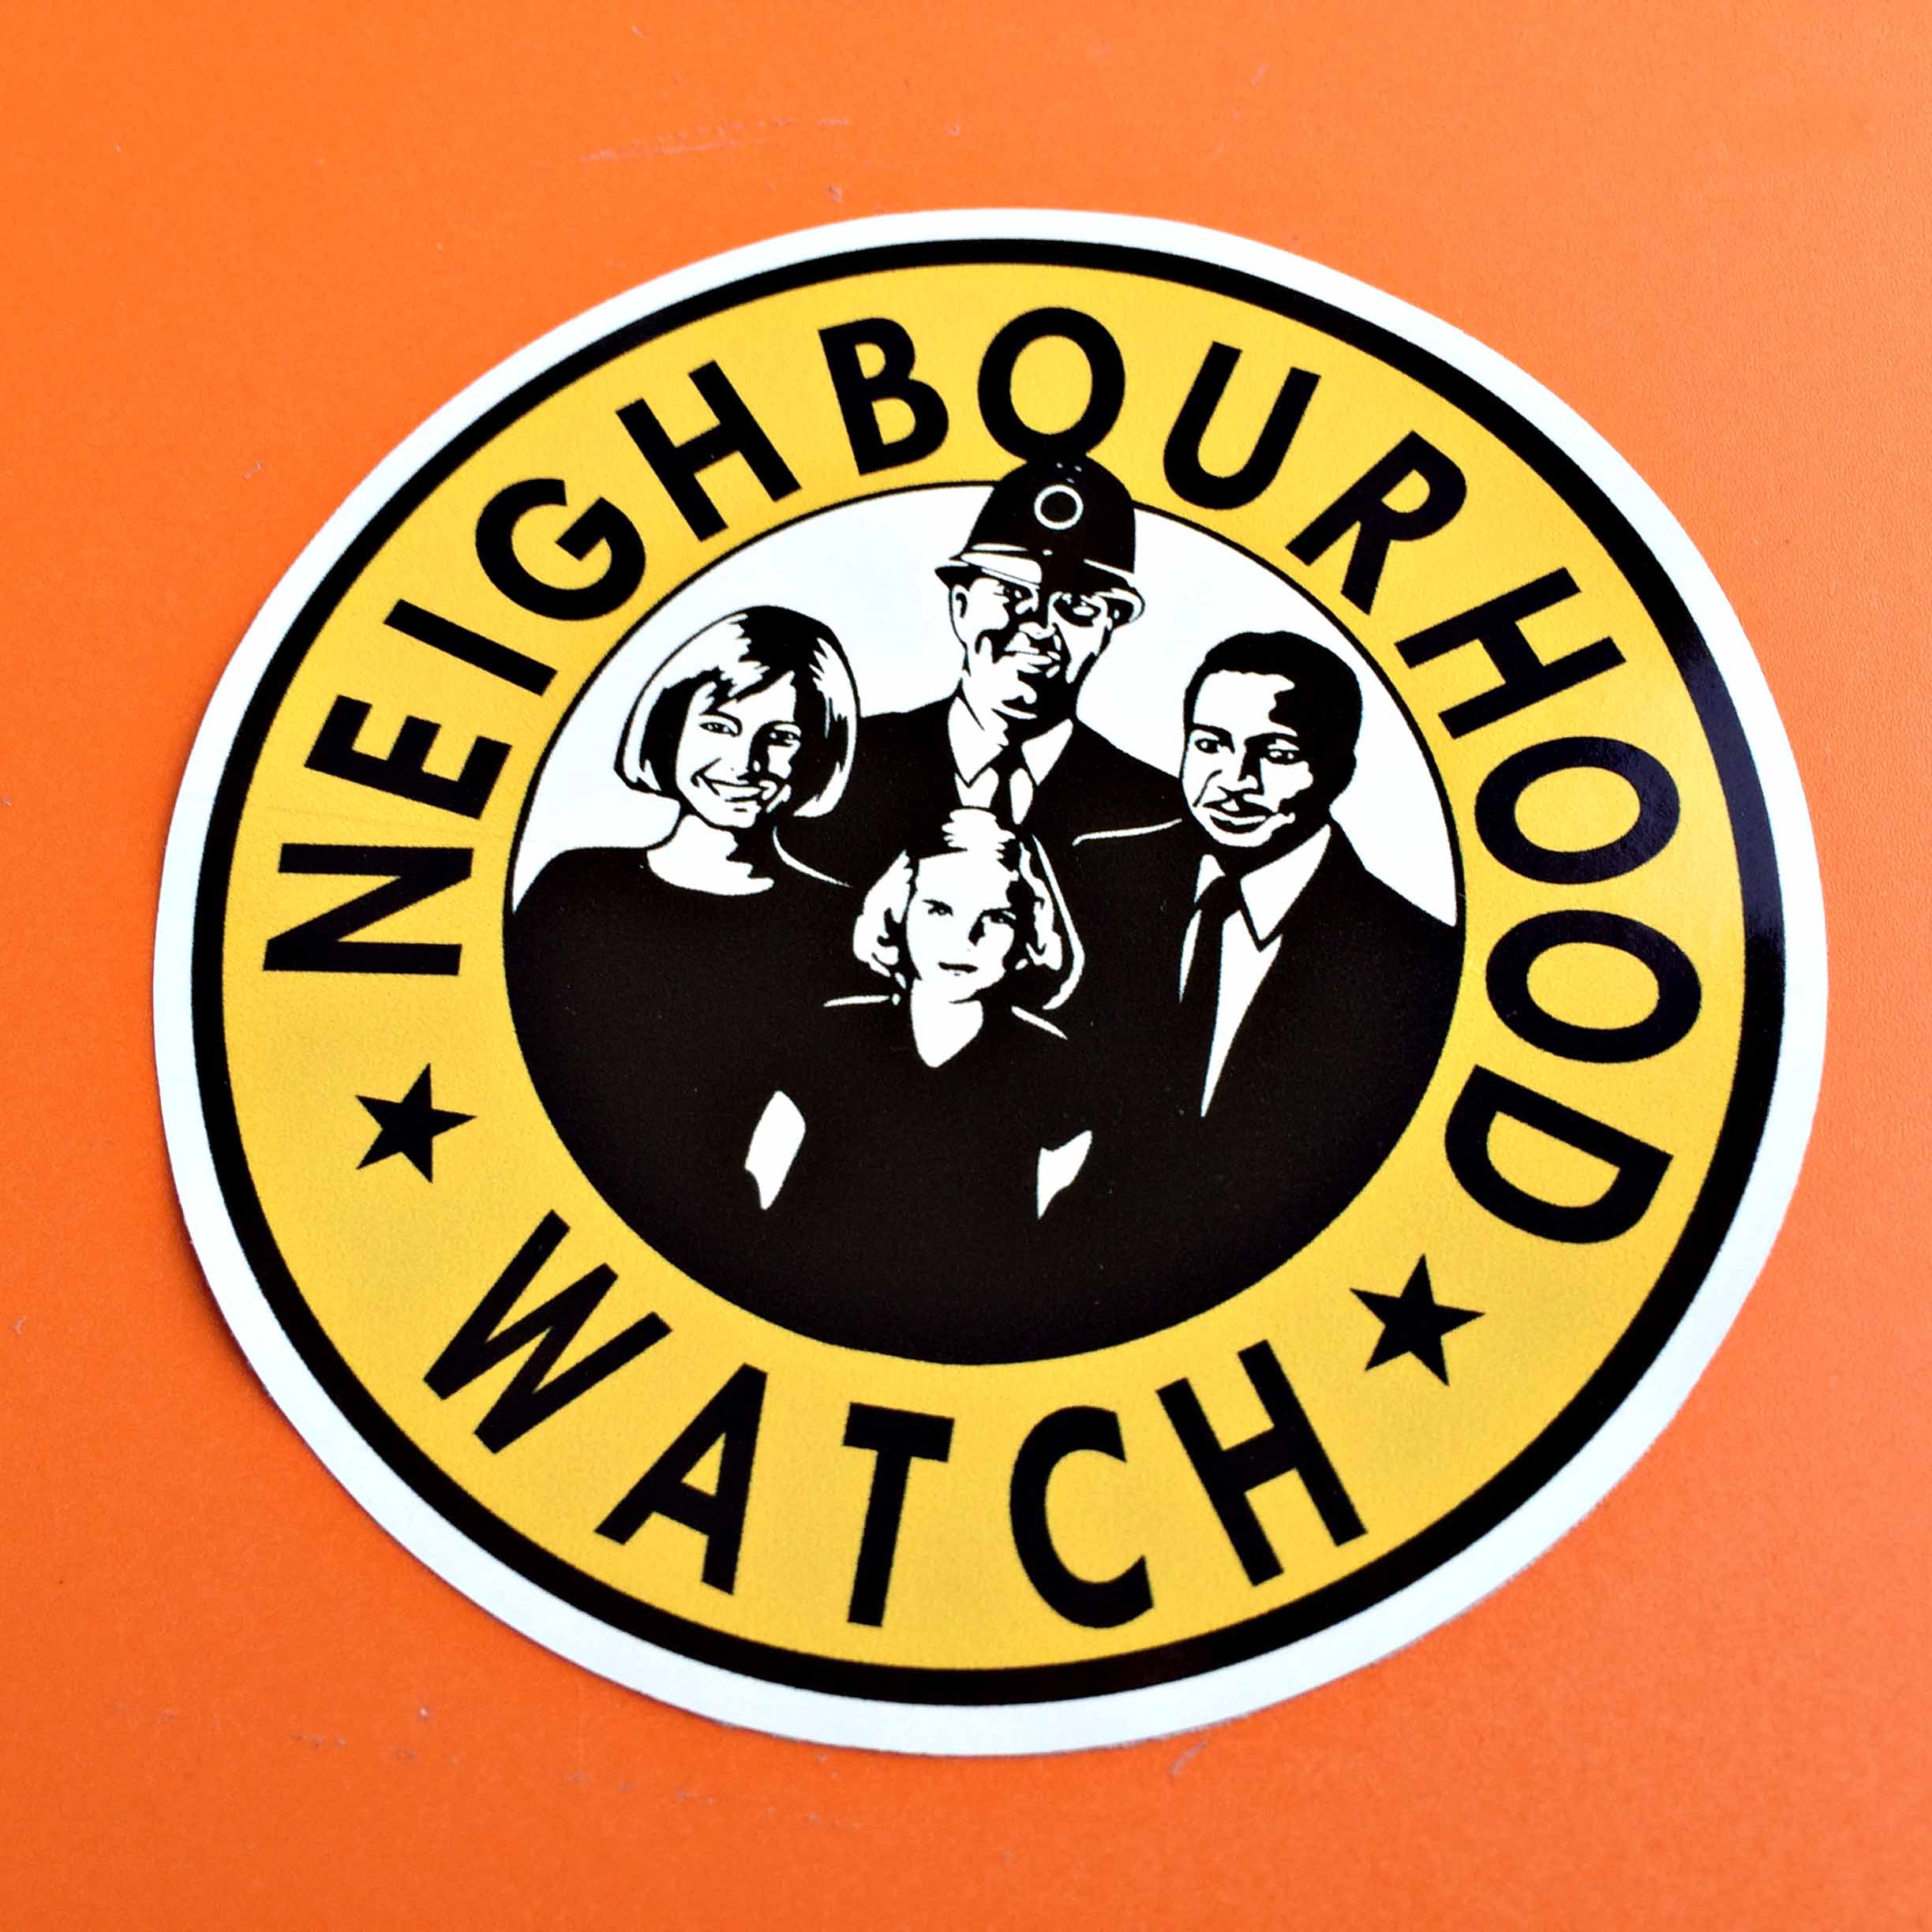 Neighbourhood Watch in black lettering around a yellow circle. Inner circle contains black and white figures of a man, woman, child and a policeman.